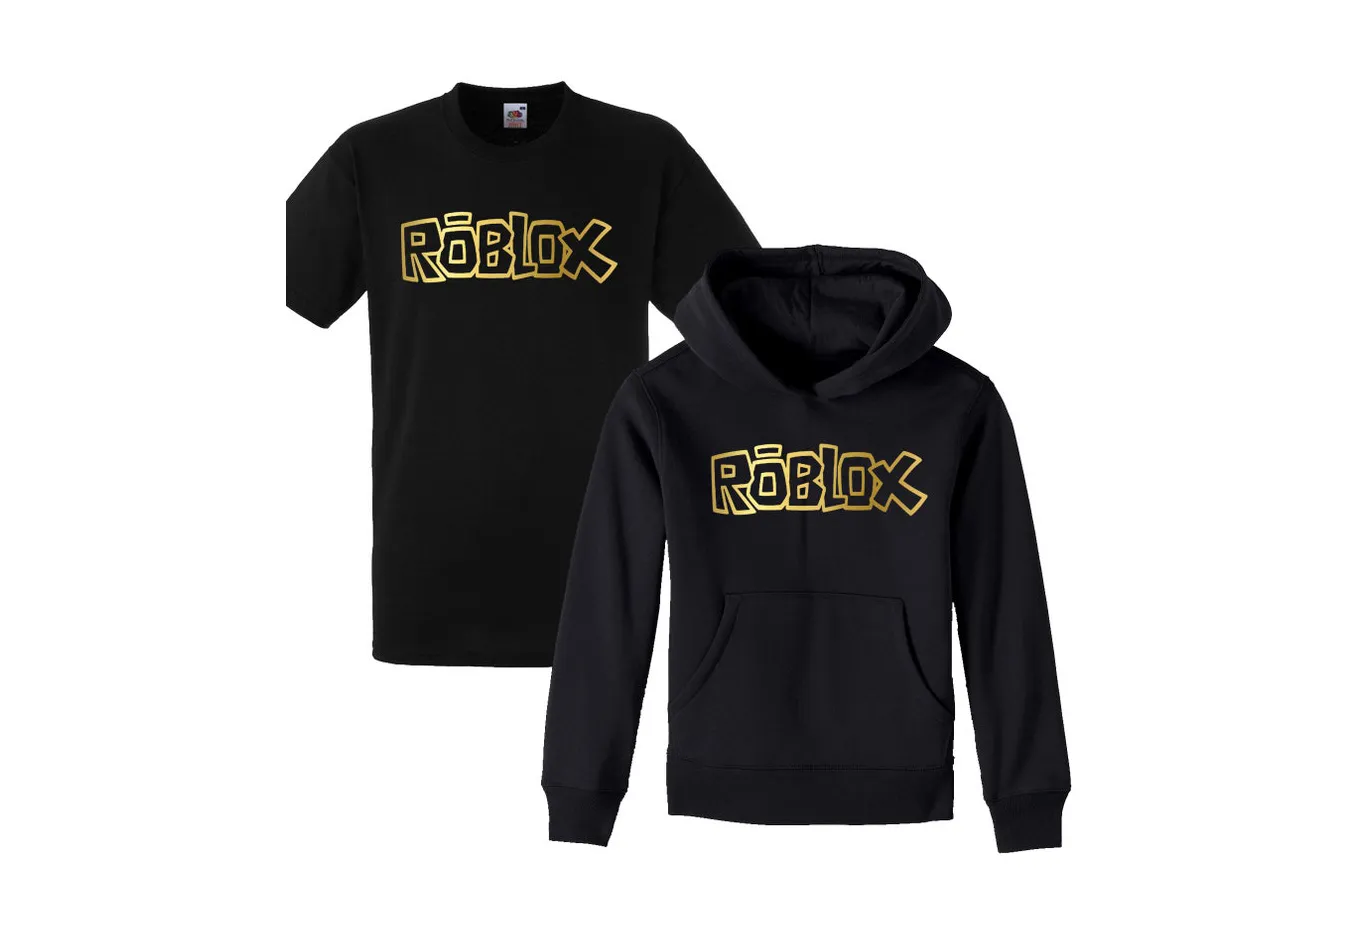 Best Roblox merchandise and gifts to buy